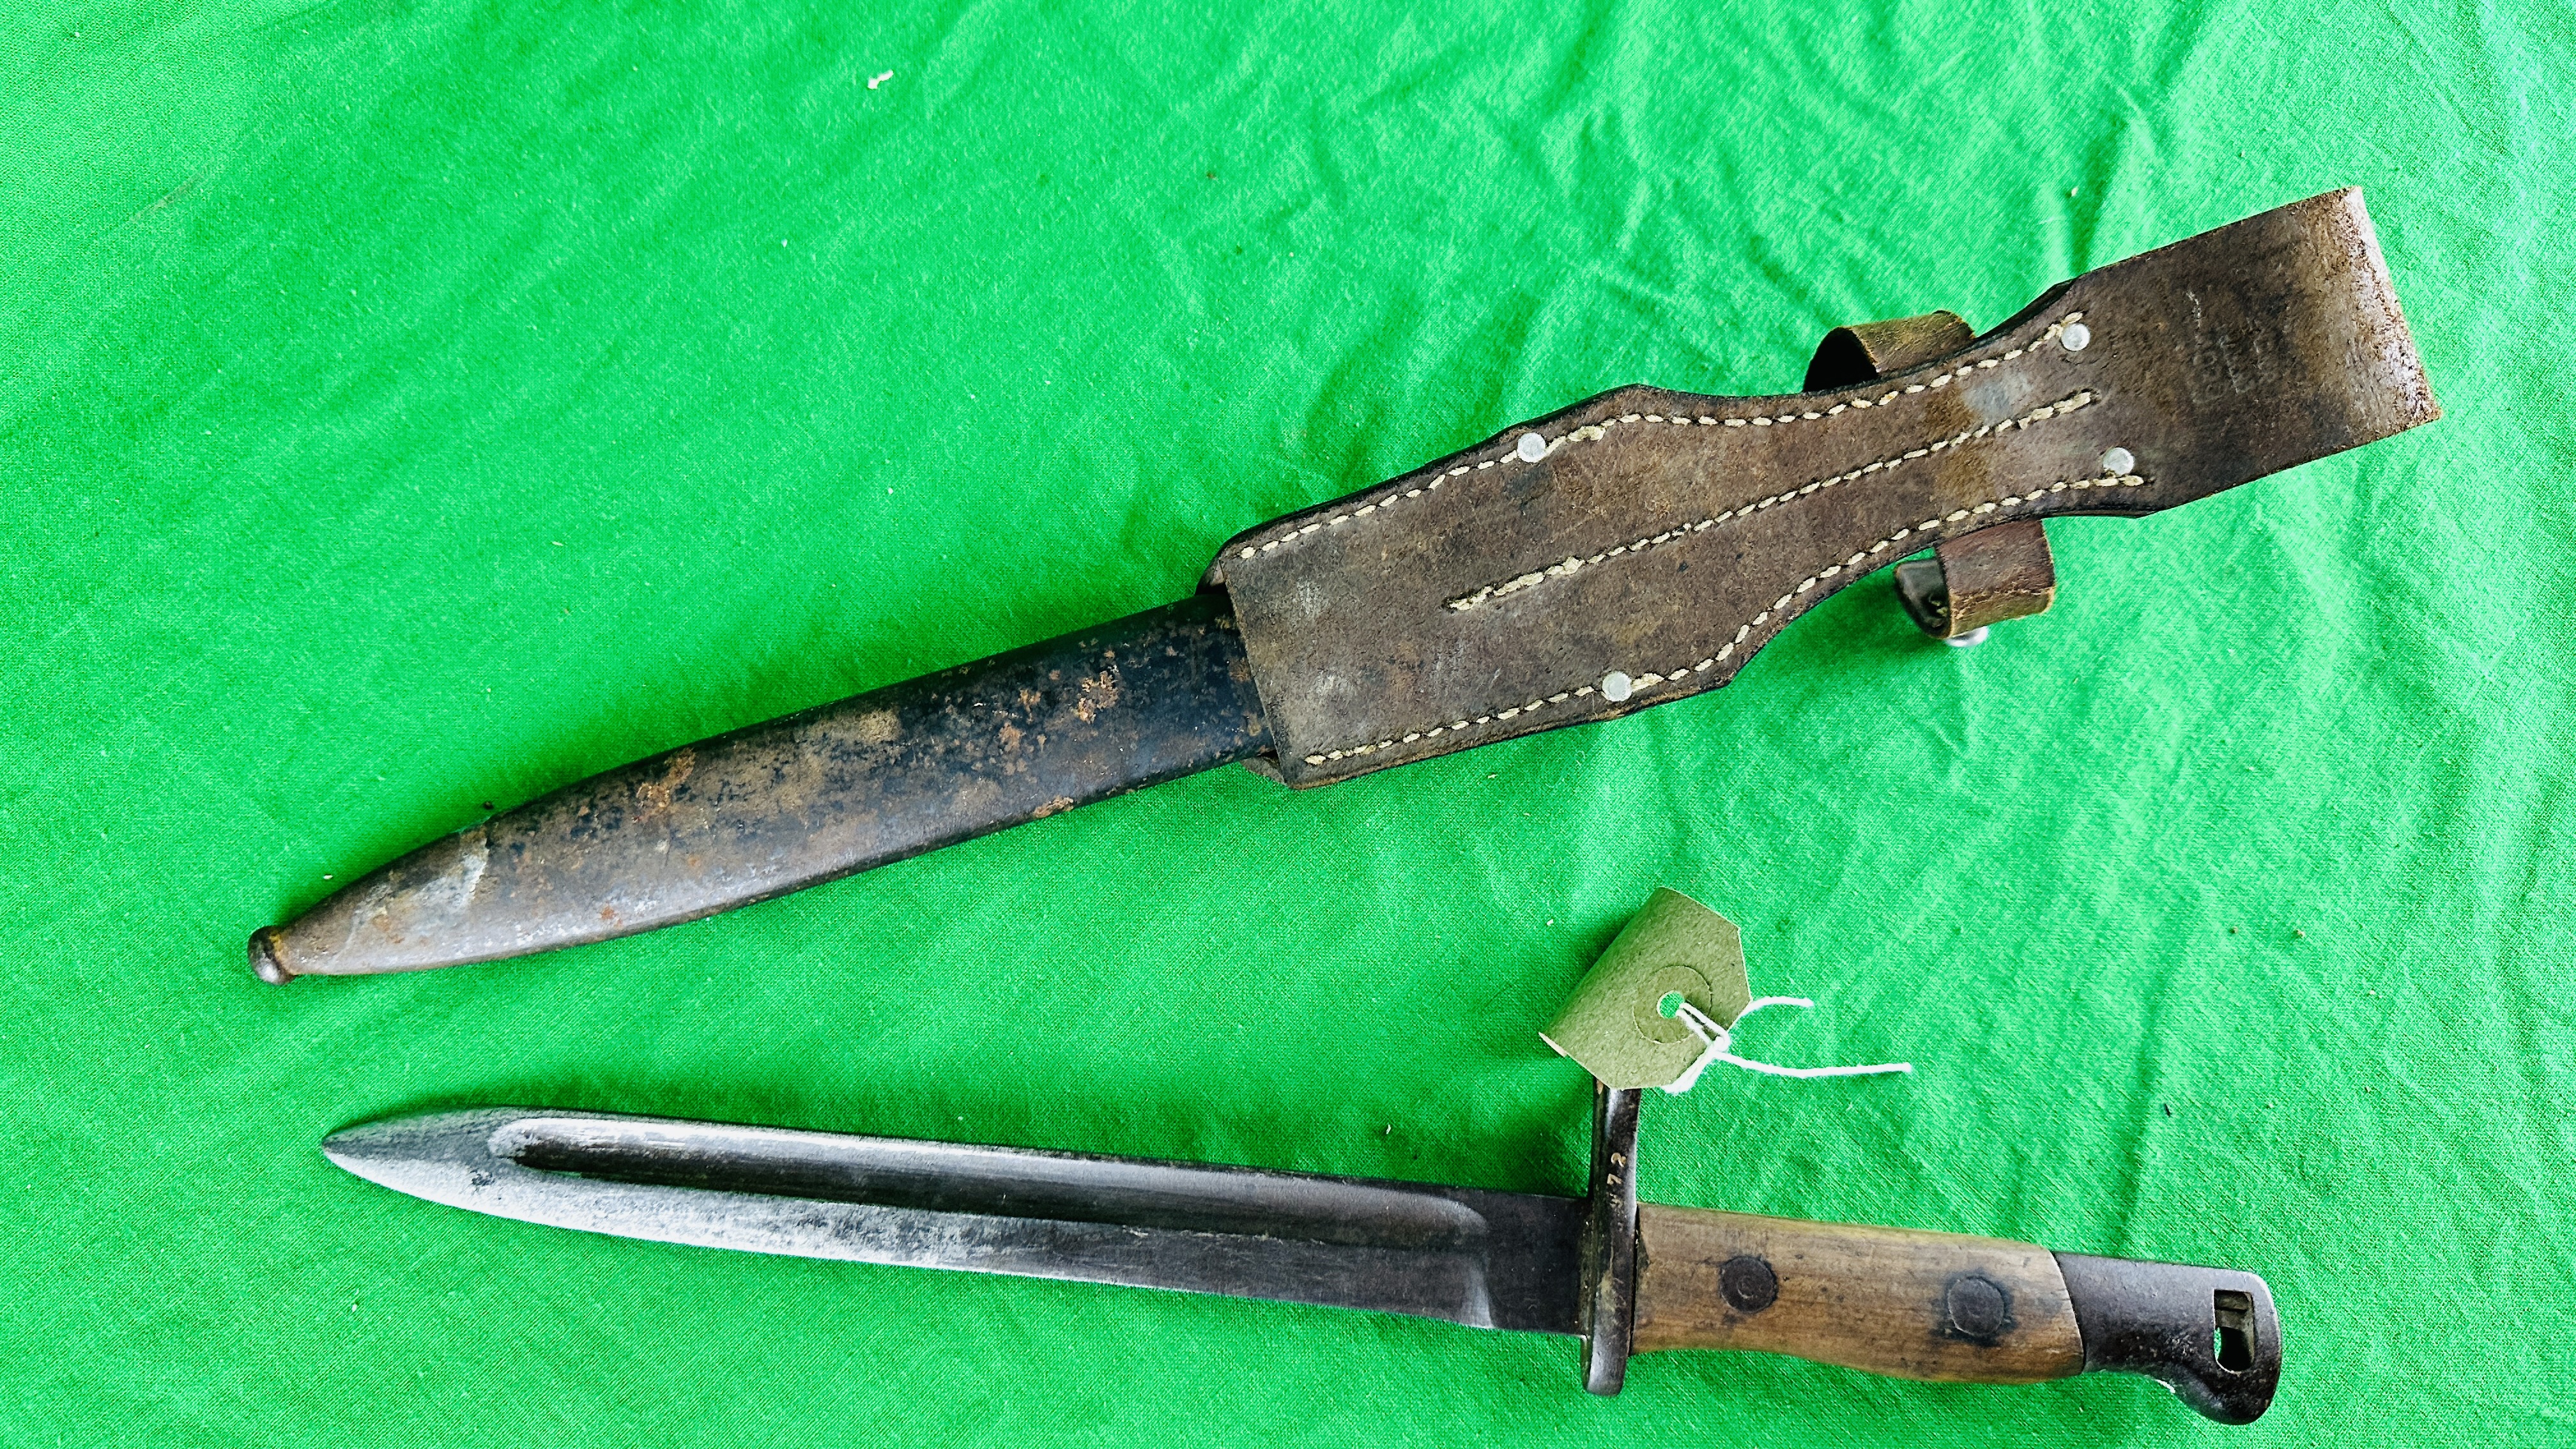 WWI SIMPSON & CO BAYONET WITH SCABBARD AND LEATHER FROG - NO POSTAGE OR PACKING AVAILABLE. - Image 14 of 14